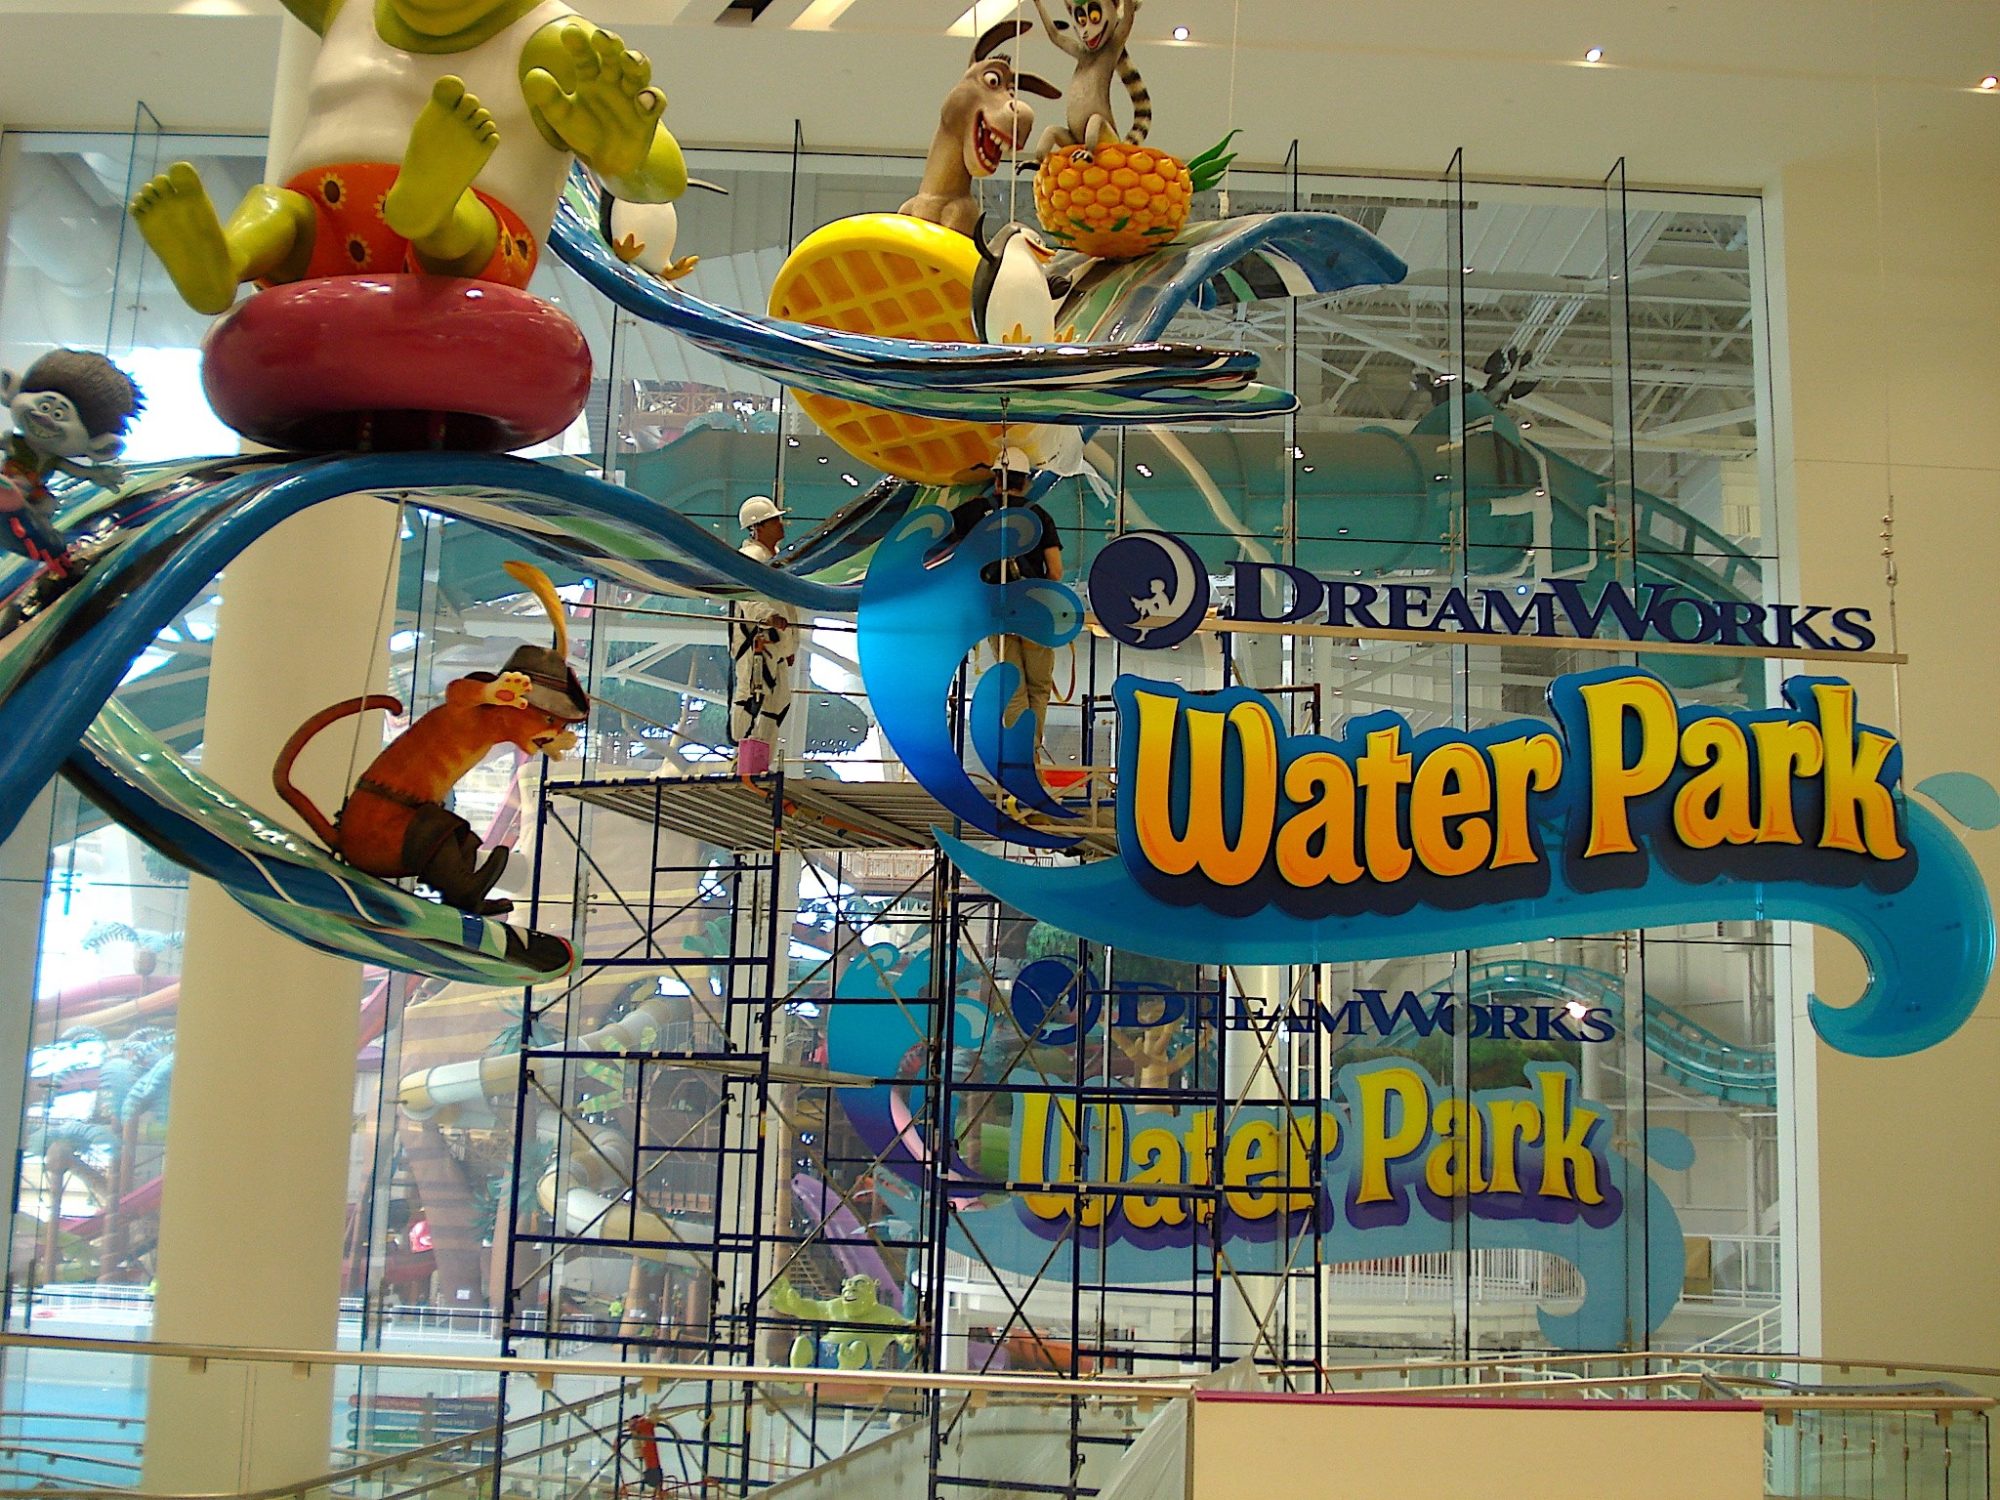 World’s first DreamWorks Animation Waterpark opens March 18 Park